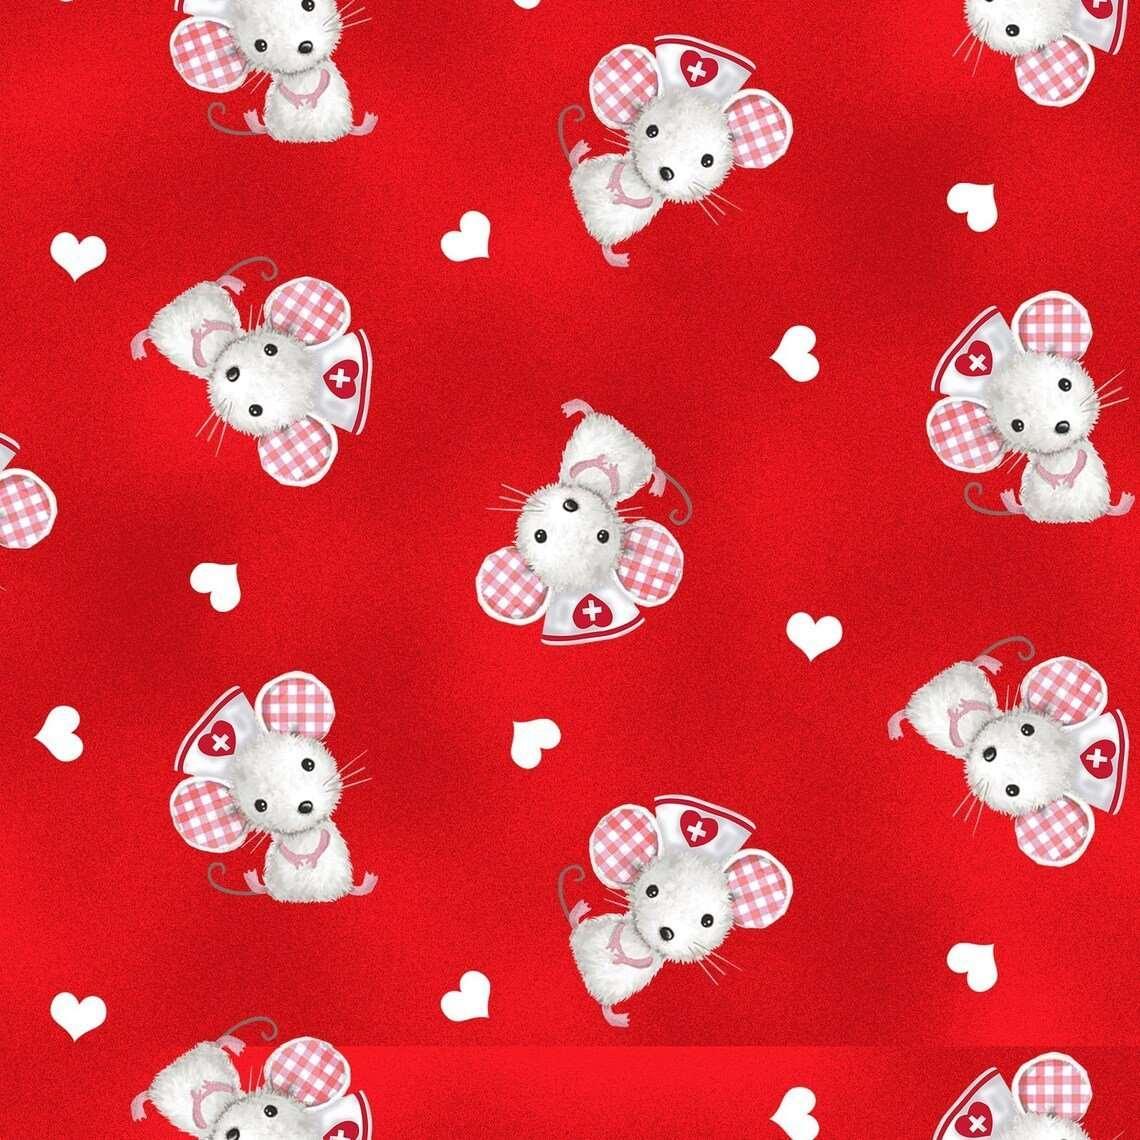 Nurse Mouse Quilting Cotton Fabric Big Hugs Collection | Fabric Design Treasures